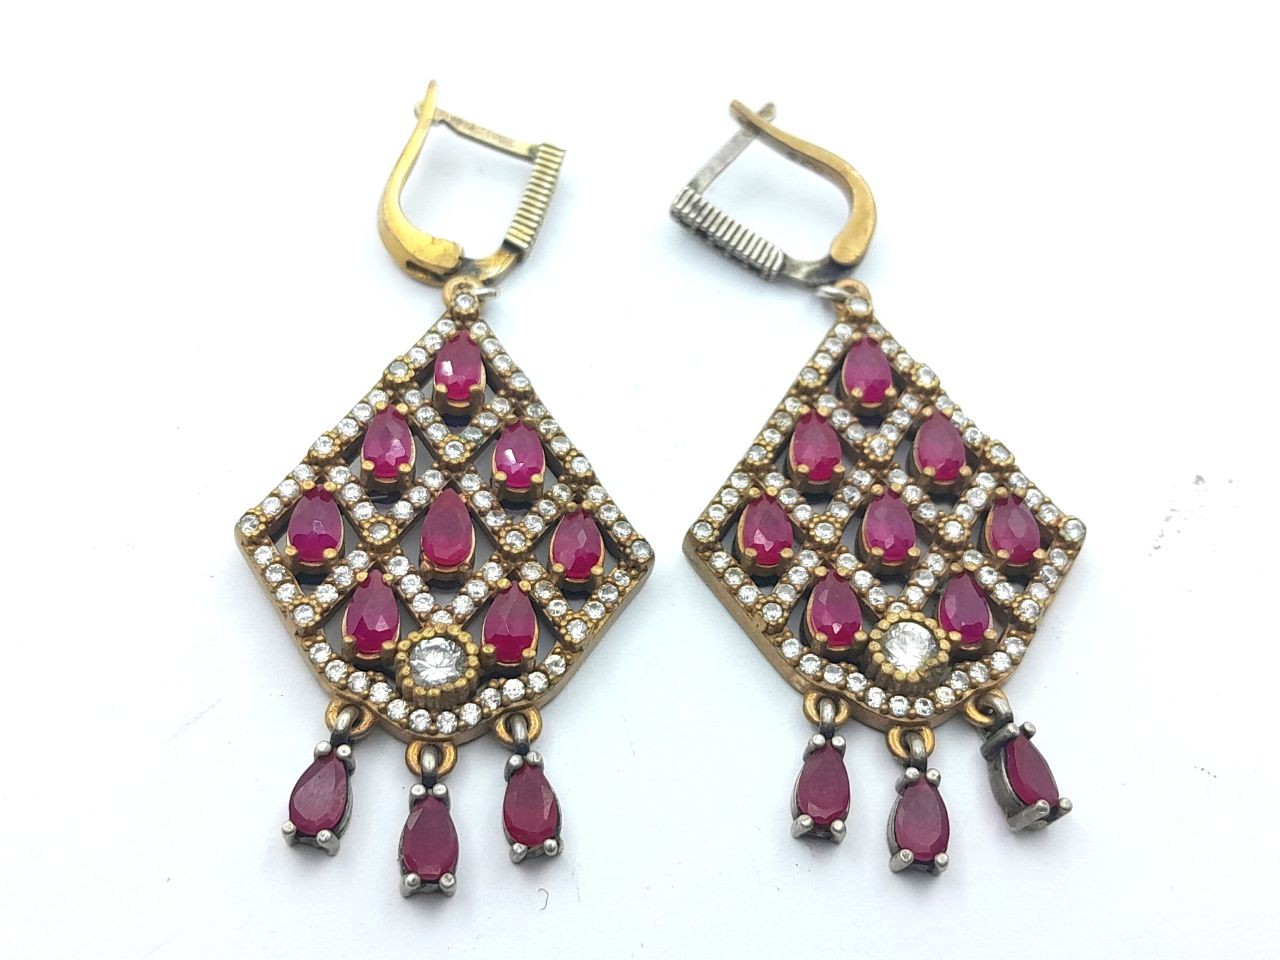 Silver earring with ruby stones